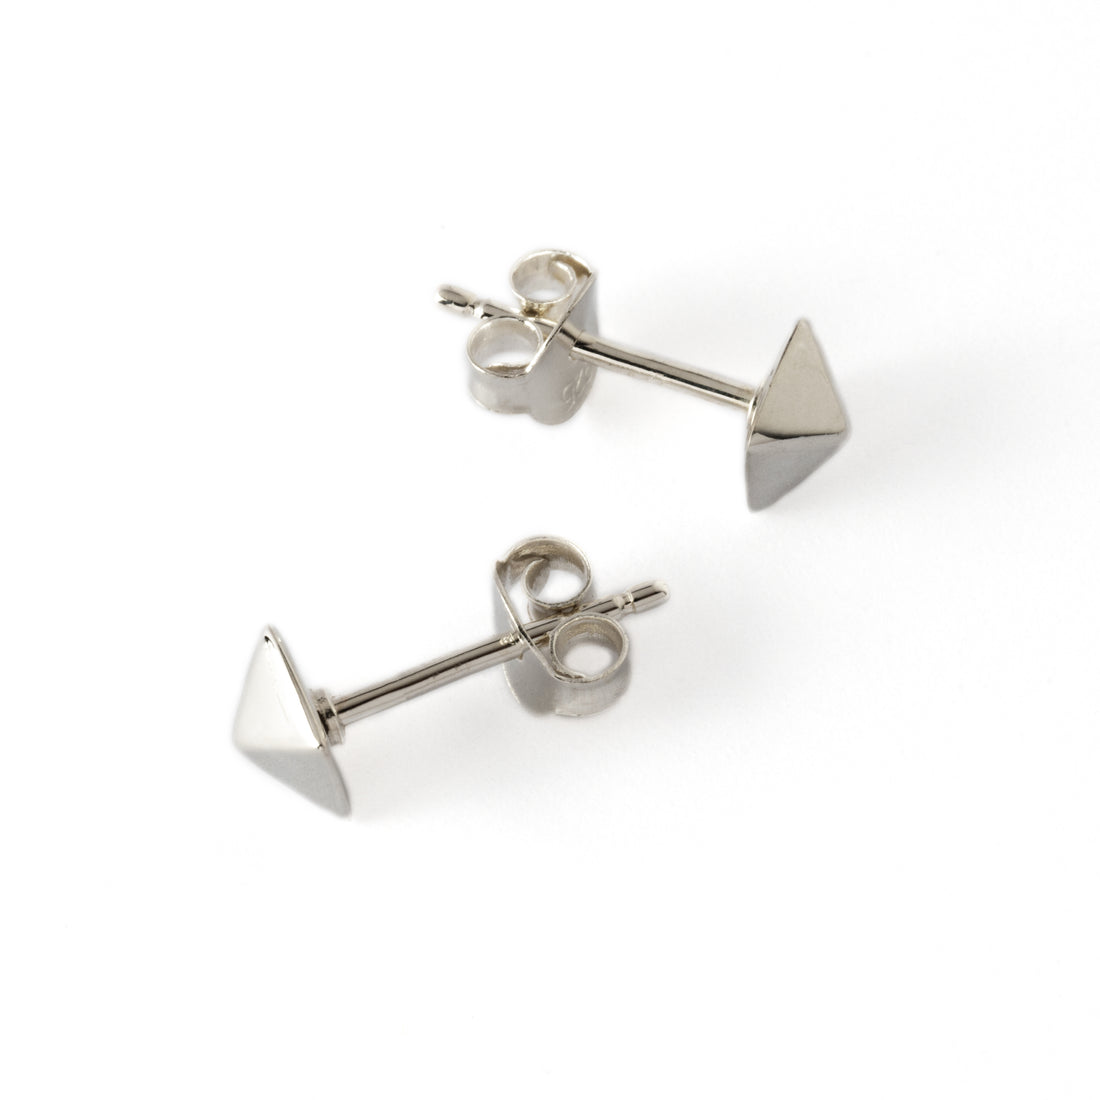 pair of Silver pyramid ear studs left and right side view